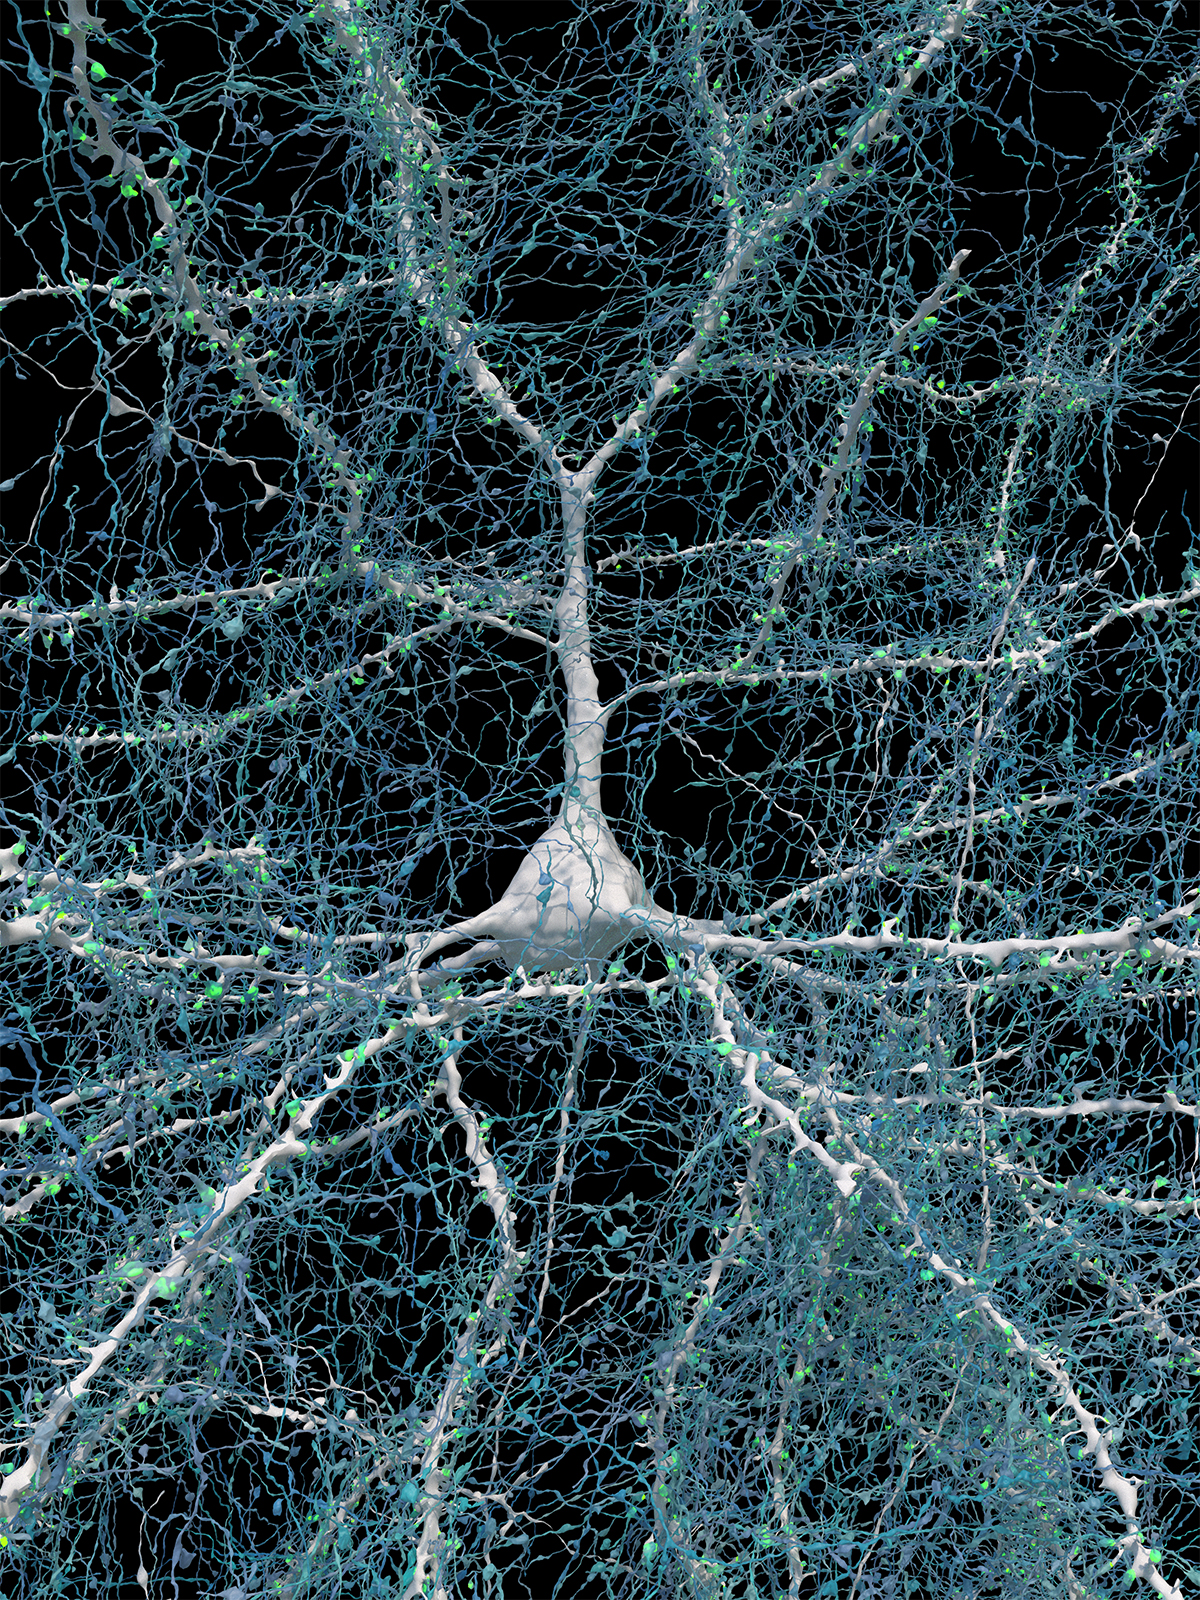 Image of a large white nerve cell with long projections that are covered with green spots (synapses) and fine webbing of blue fibers, representing axons.